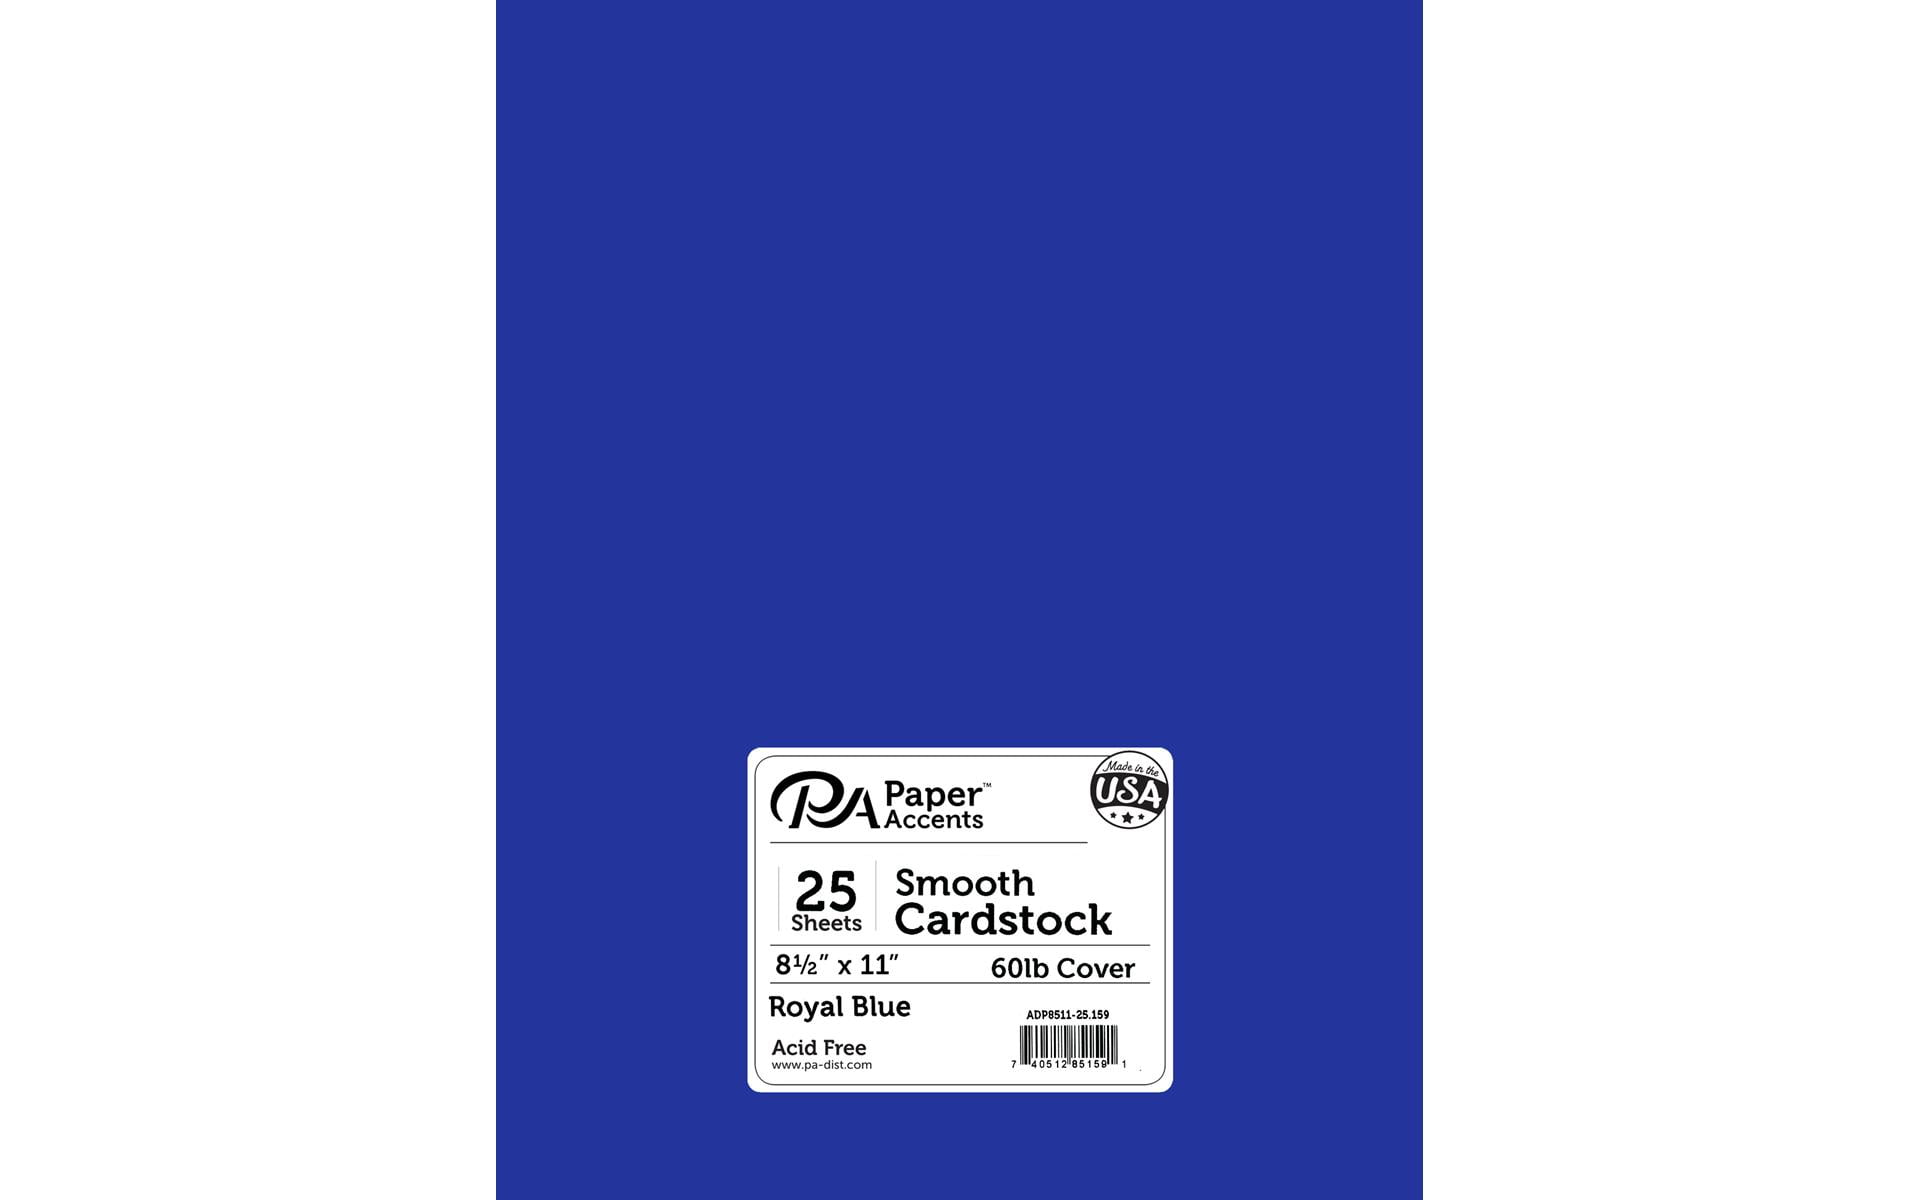 65Lb Cover Royal Blue Cardstock 100 Sheets 8.5 x 11 inch 